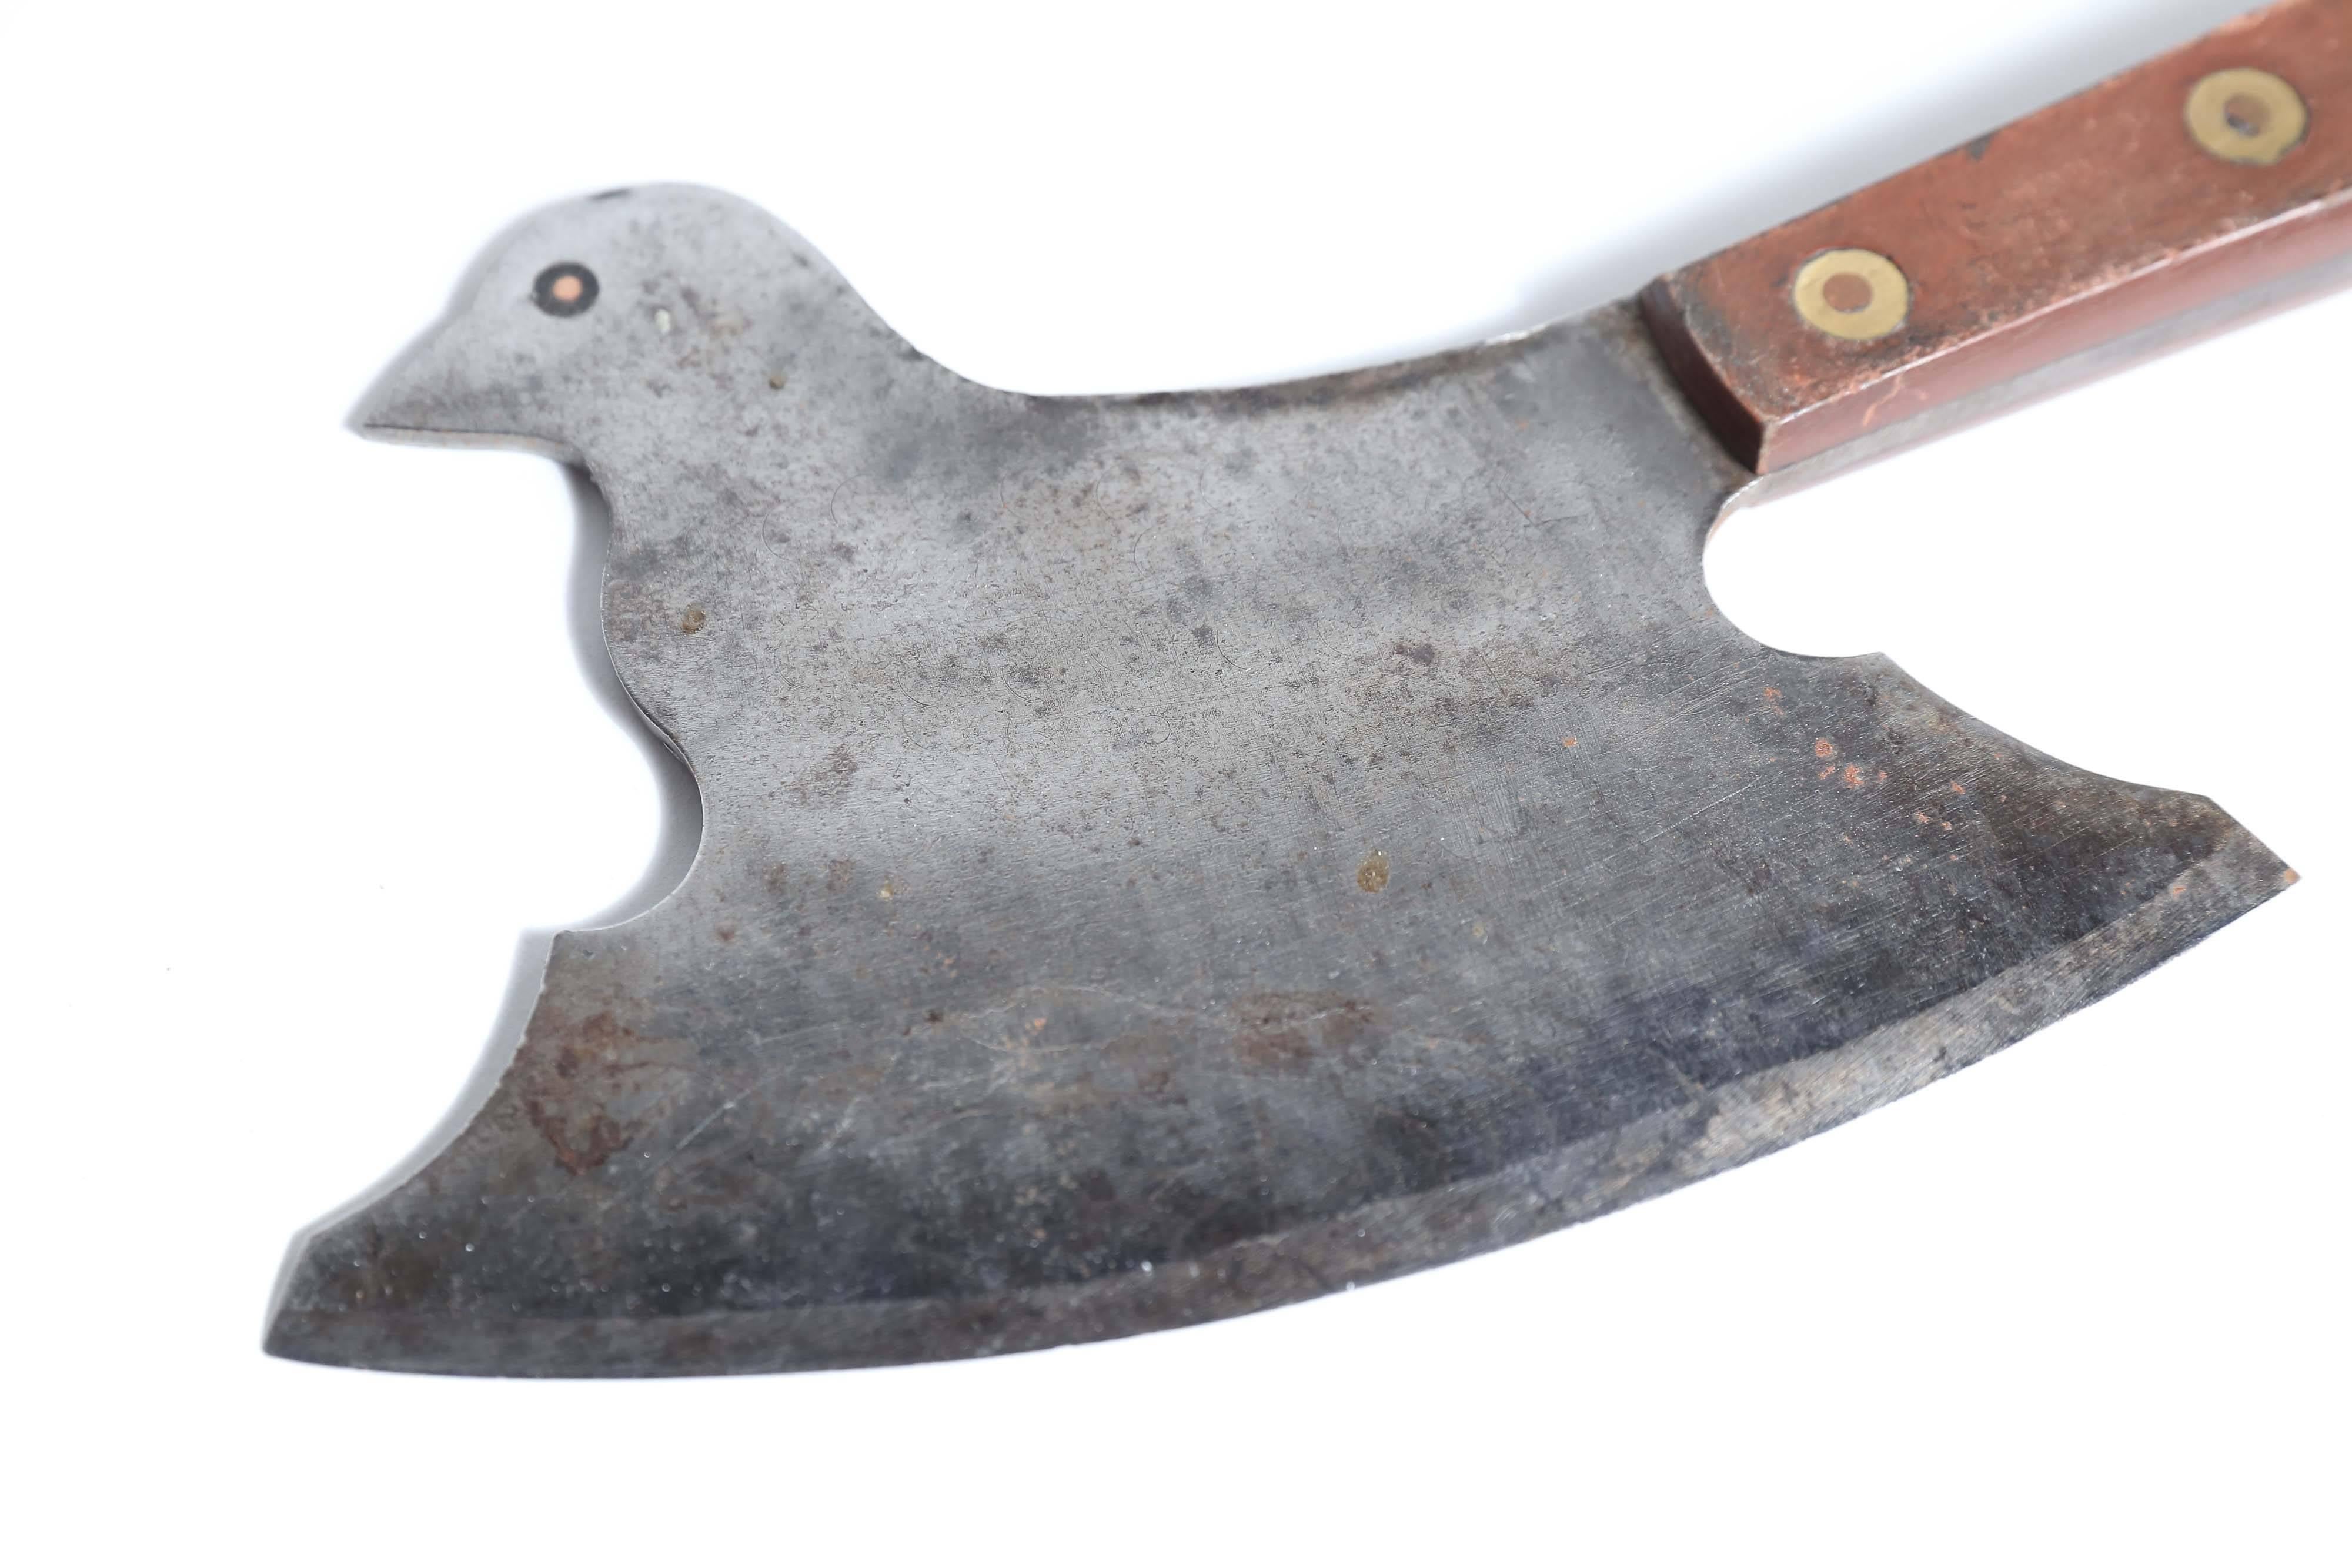 A delightful figurative butcher's cleaver from France in the shape of a bird. Measure: With a 7.5 inch blade, the integral handle has wooden scales attached with brass and copper rivets. The bird's-eye is copper.